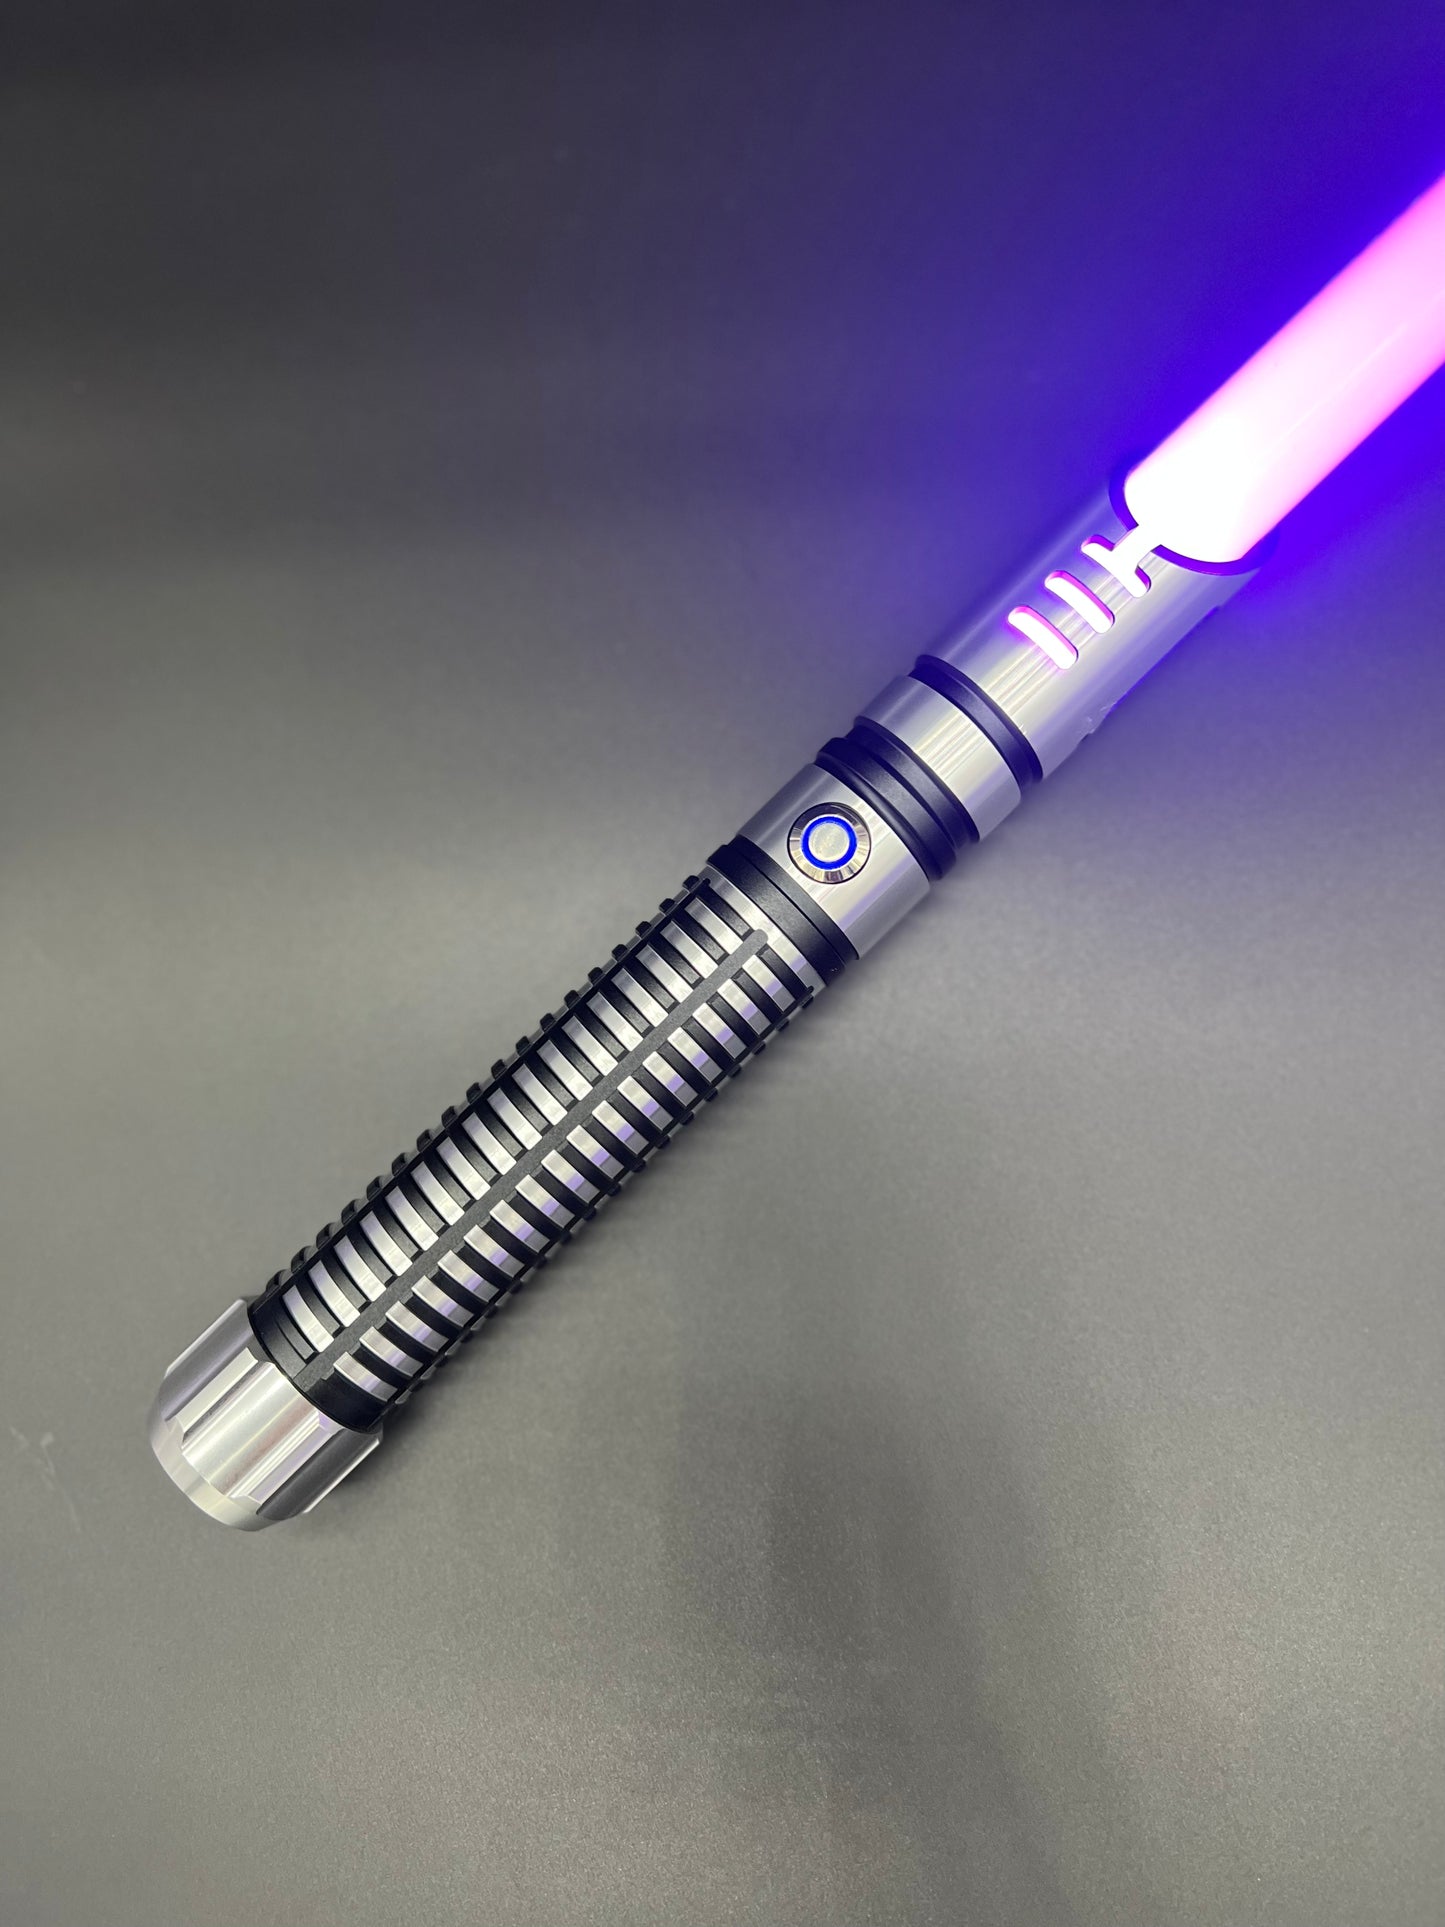 THE SORZUS SYN LIGHTSABER